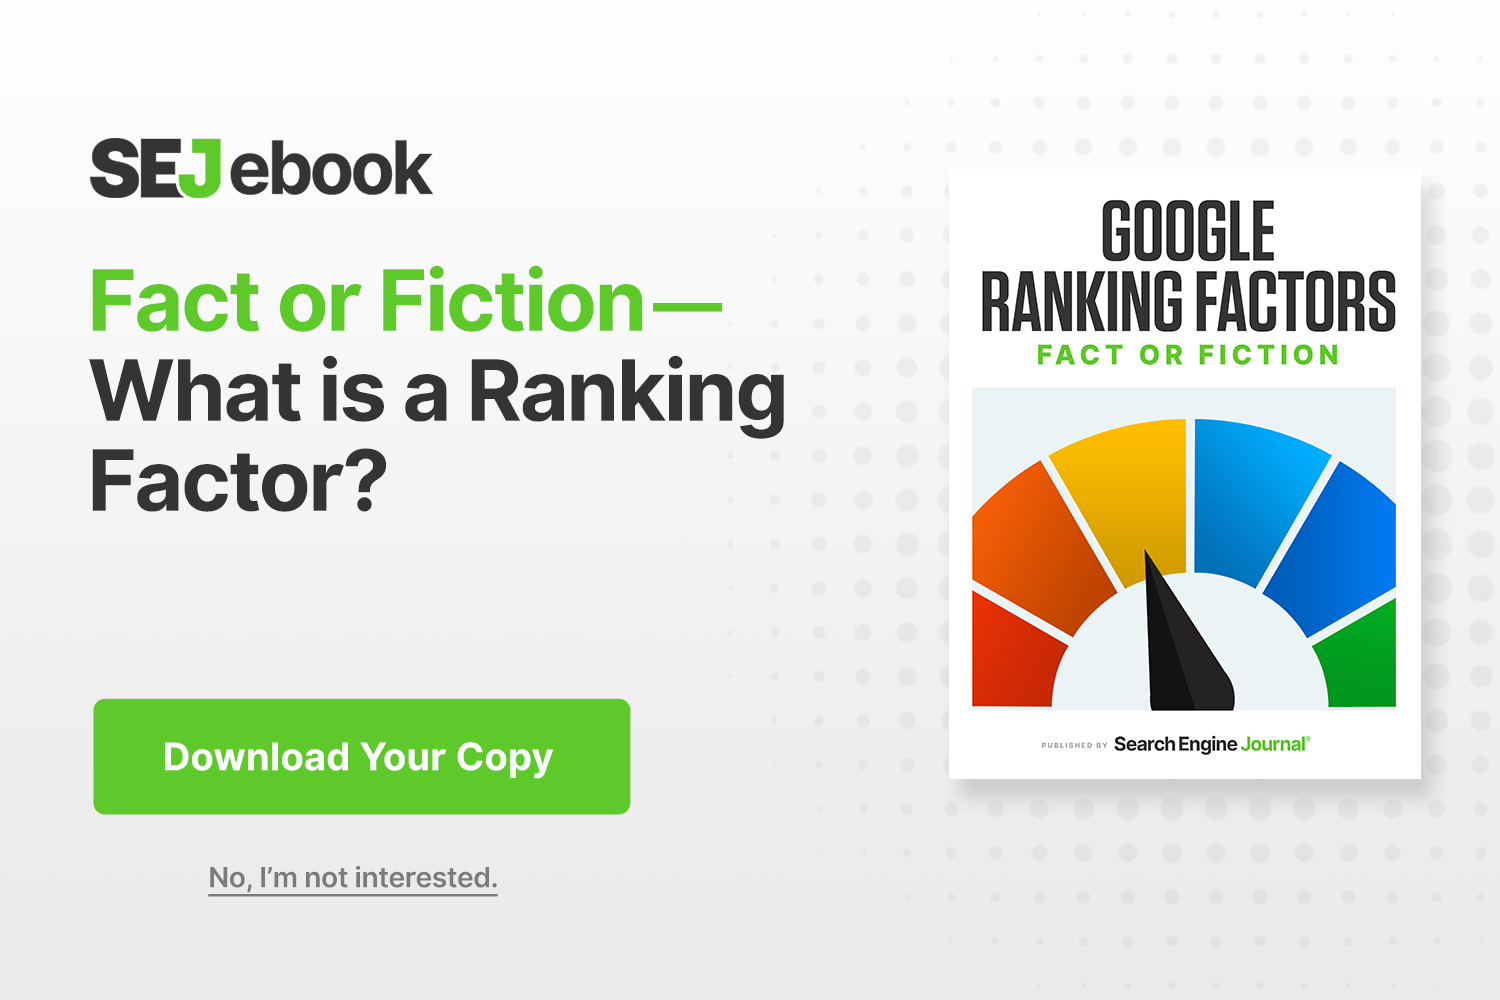 Fact or Fiction: What is a Ranking Factor?